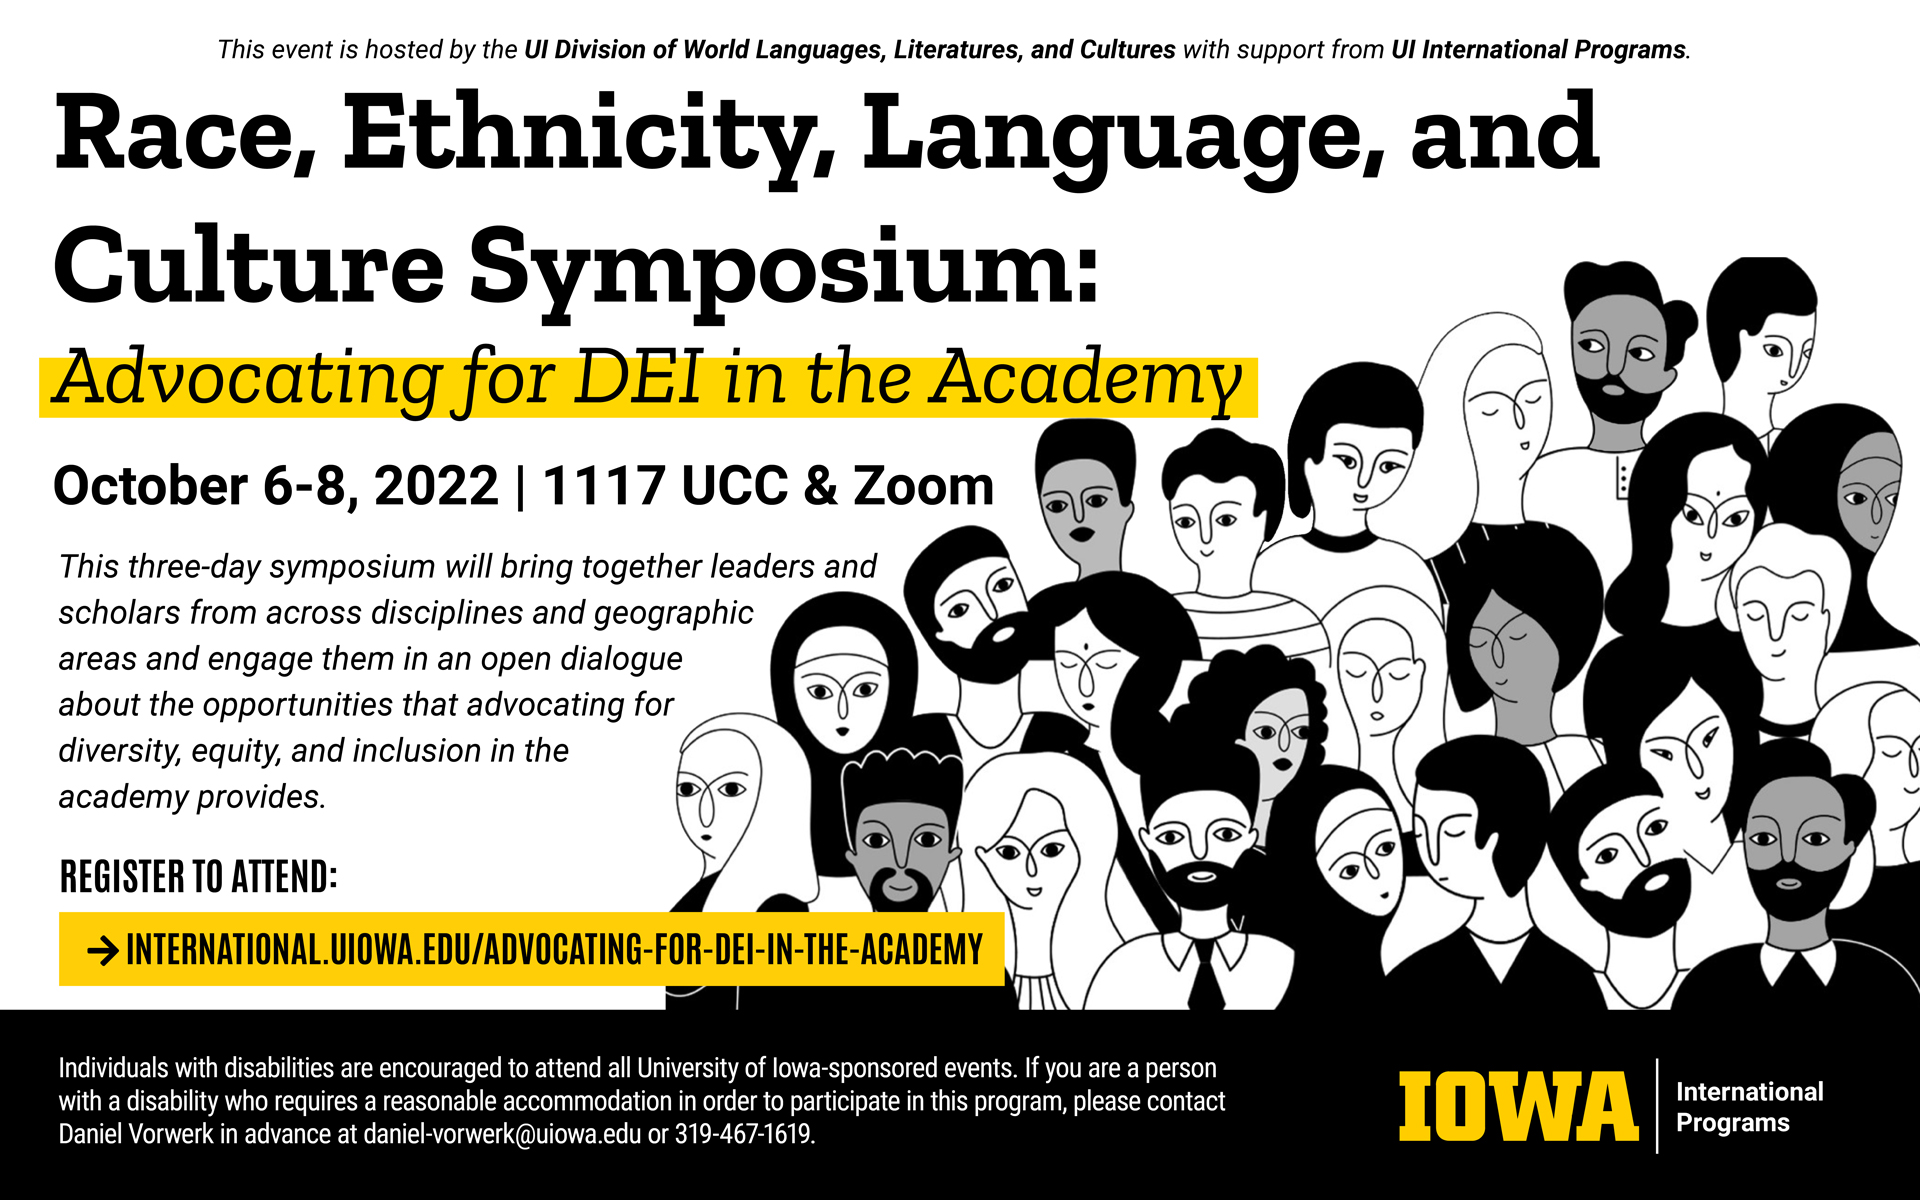 This event is hosted by the UI Division of World Languages, Literatures, and Cultures with support from UI International Programs. Race, Ethnicity, Language, and Culture Symposium: Advocating for DEI in the Academy. October 6-8, 2022, in room 1117 UCC and Zoom. This three day symposium will bring together leaders and scholars from across disciplines and geographic areas and engage them in an open dialogue about the opportunities that advocating for diversity, equity, and inclusion in the academy provides. Register to attend: international.uiowa.edu/advocating-for-dei-in-the-academy. Individuals with disabilities are encouraged to attend all University of Iowa-sponsored events. If you are a person with a disability who requires a reasonable accommodation in order to participate in this program, please contact Daniel Vorwerk in advance at daniel-vorwerk@uiowa.edu or 319-467-1619.  